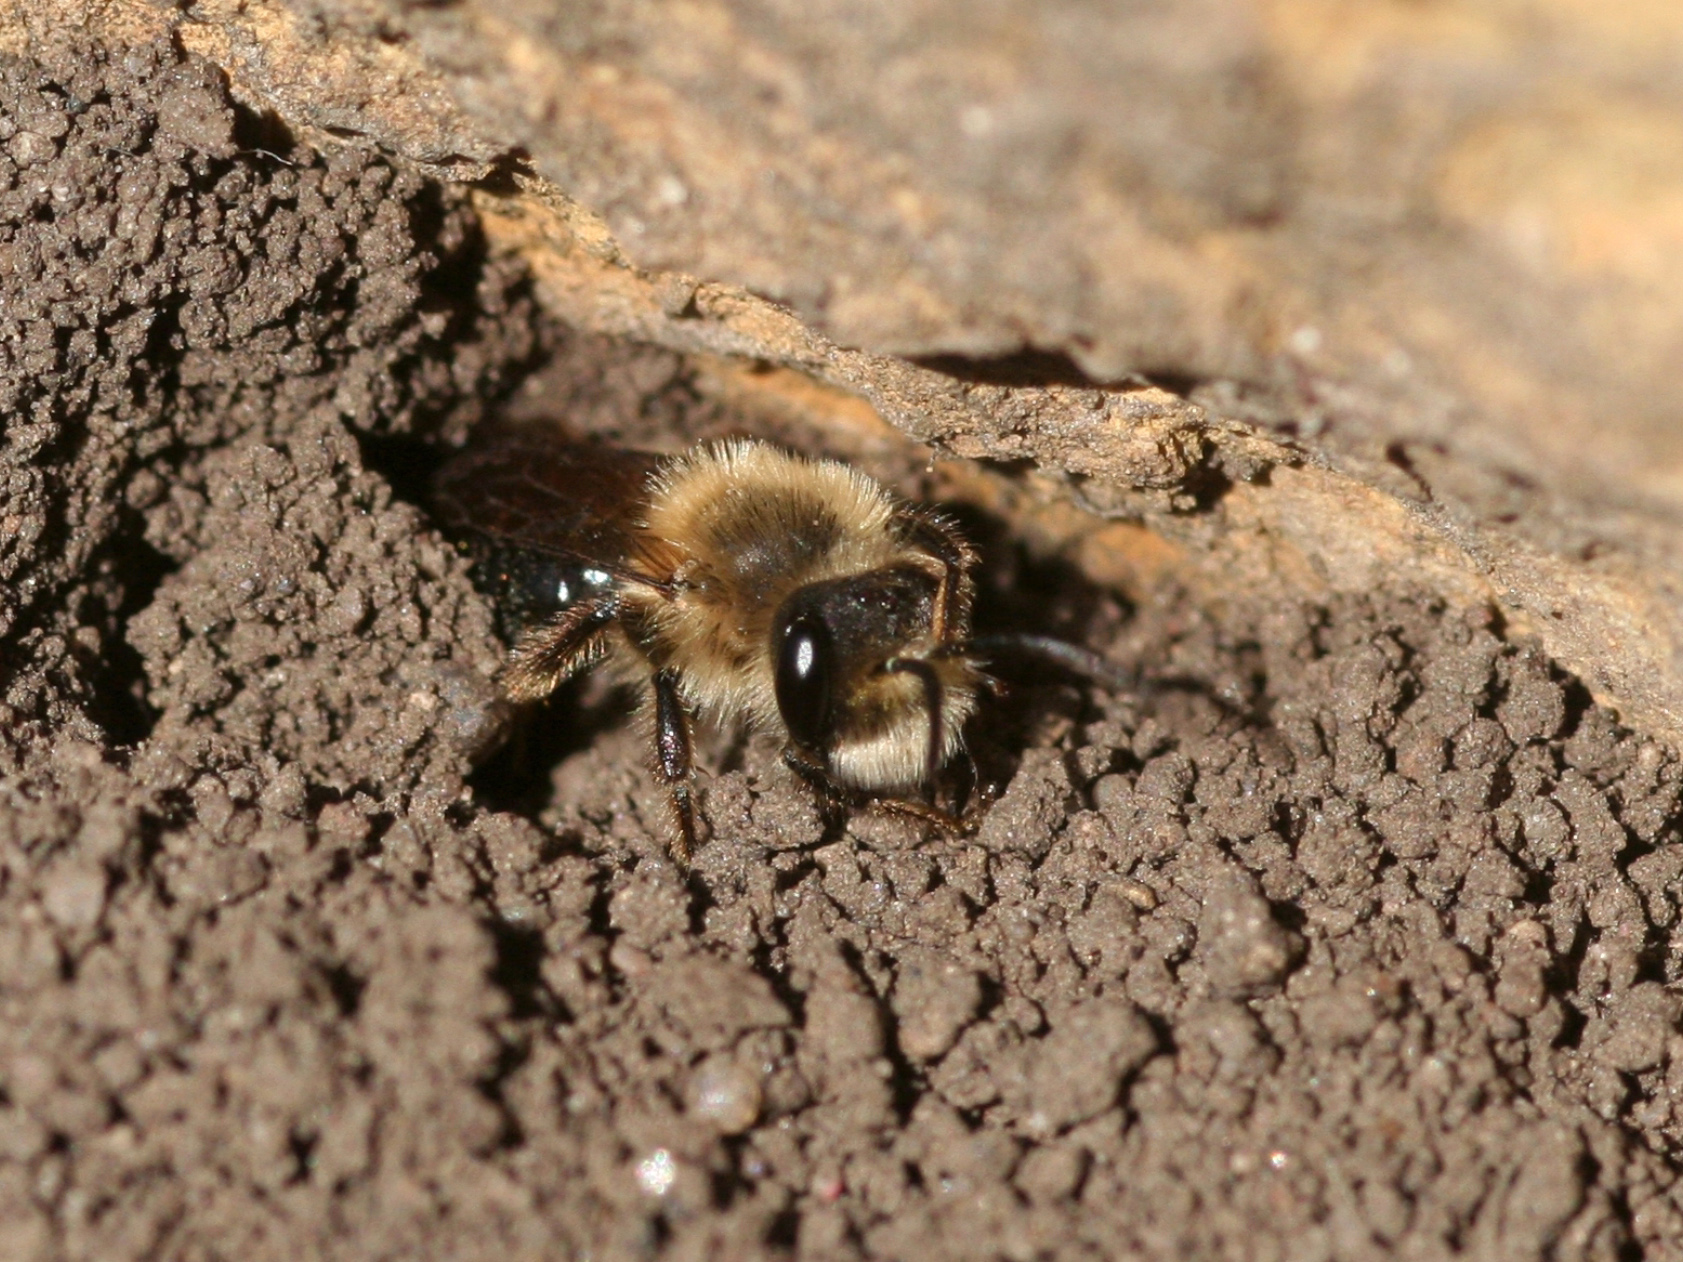 A fuzzy bee pokes its head out of a hole in loose, brown dirt.